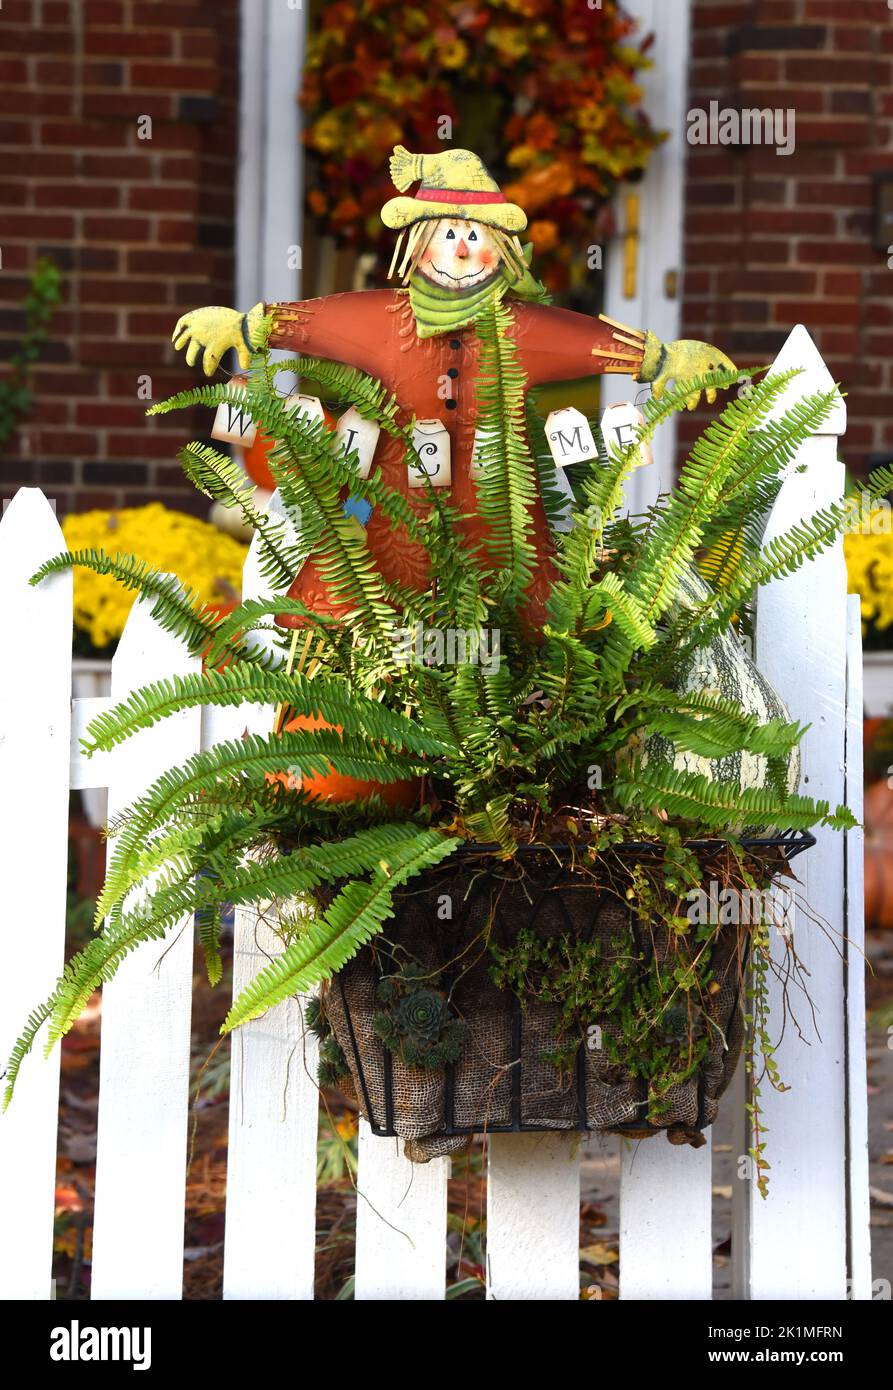 Autumn Scarecrow welcomes visitors with open arms.  He is perched in a pot sporting an air fern. Gate and fence are white picket. Stock Photo